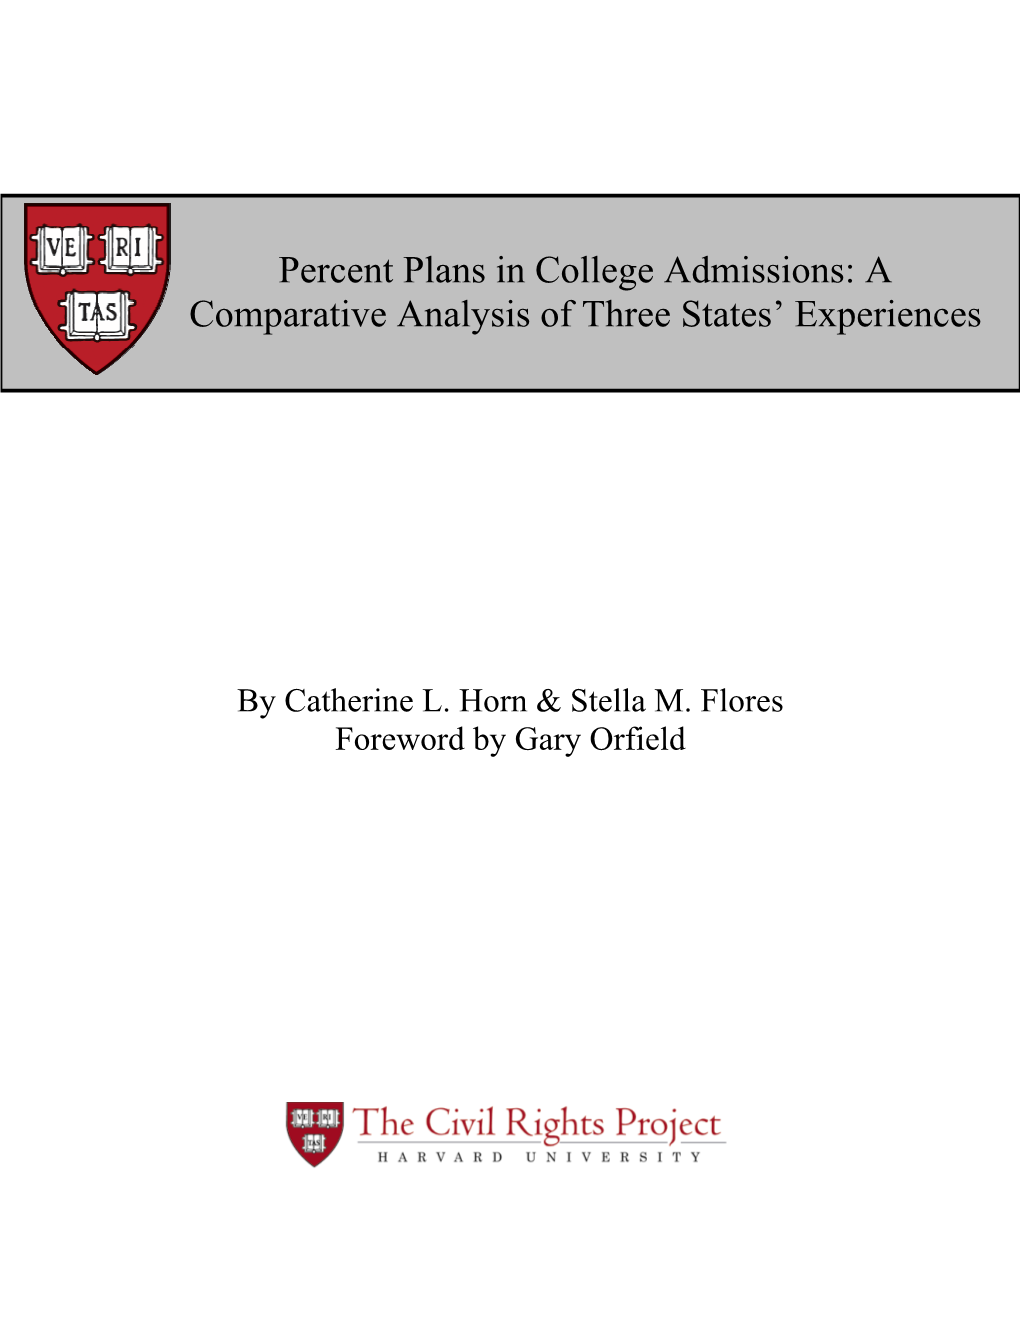 Percent Plans in College Admissions: a Comparative Analysis of Three States’ Experiences